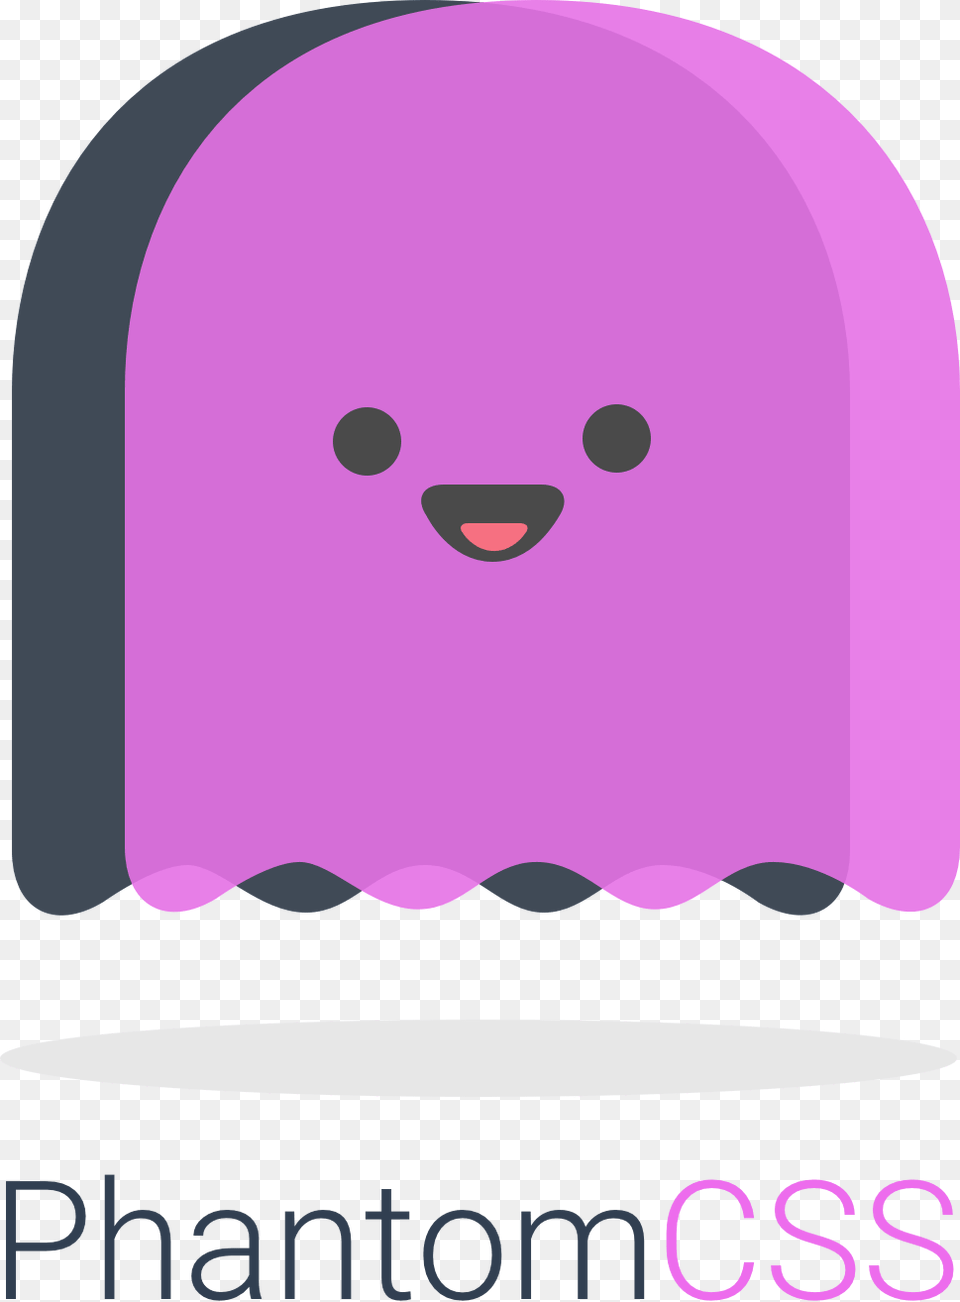 Cute Image Of A Ghost Phantomcss, Clothing, Hat, Purple, Cap Free Transparent Png